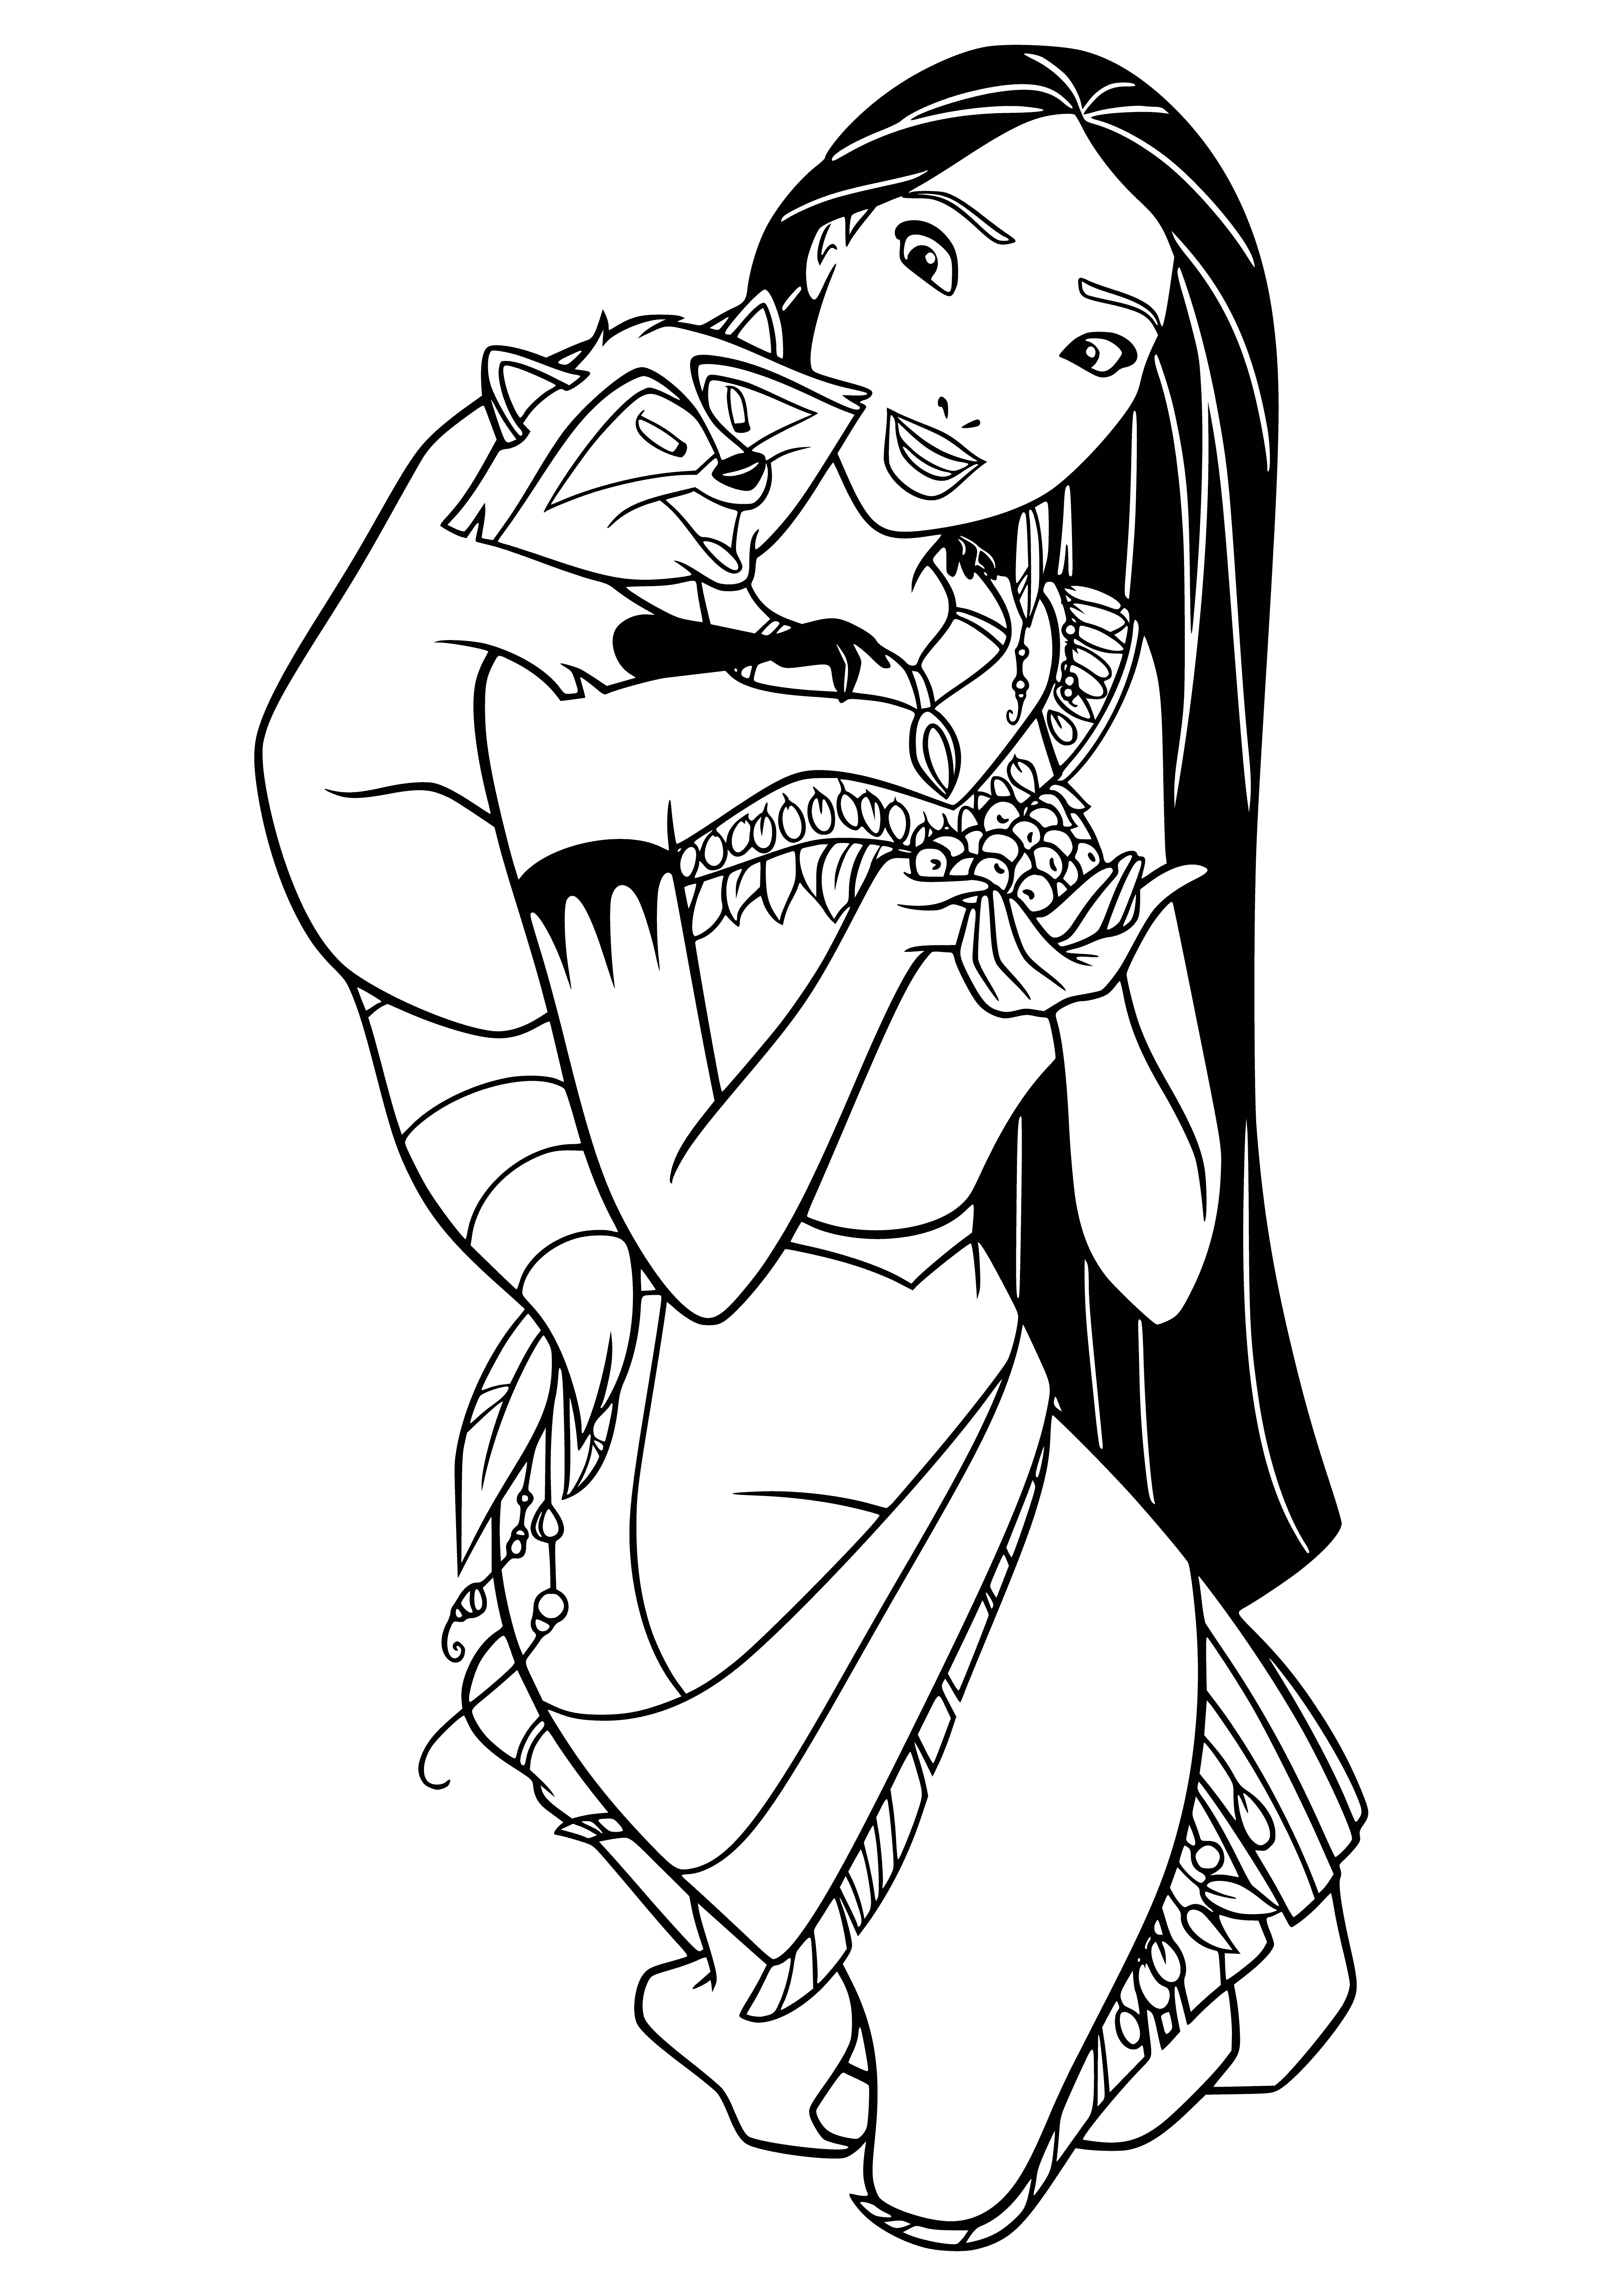 coloring page: Pocahontas stands in center of coloring page, surrounded by bird, dog, parrot, and girl in green dress on rug of pink & purple.